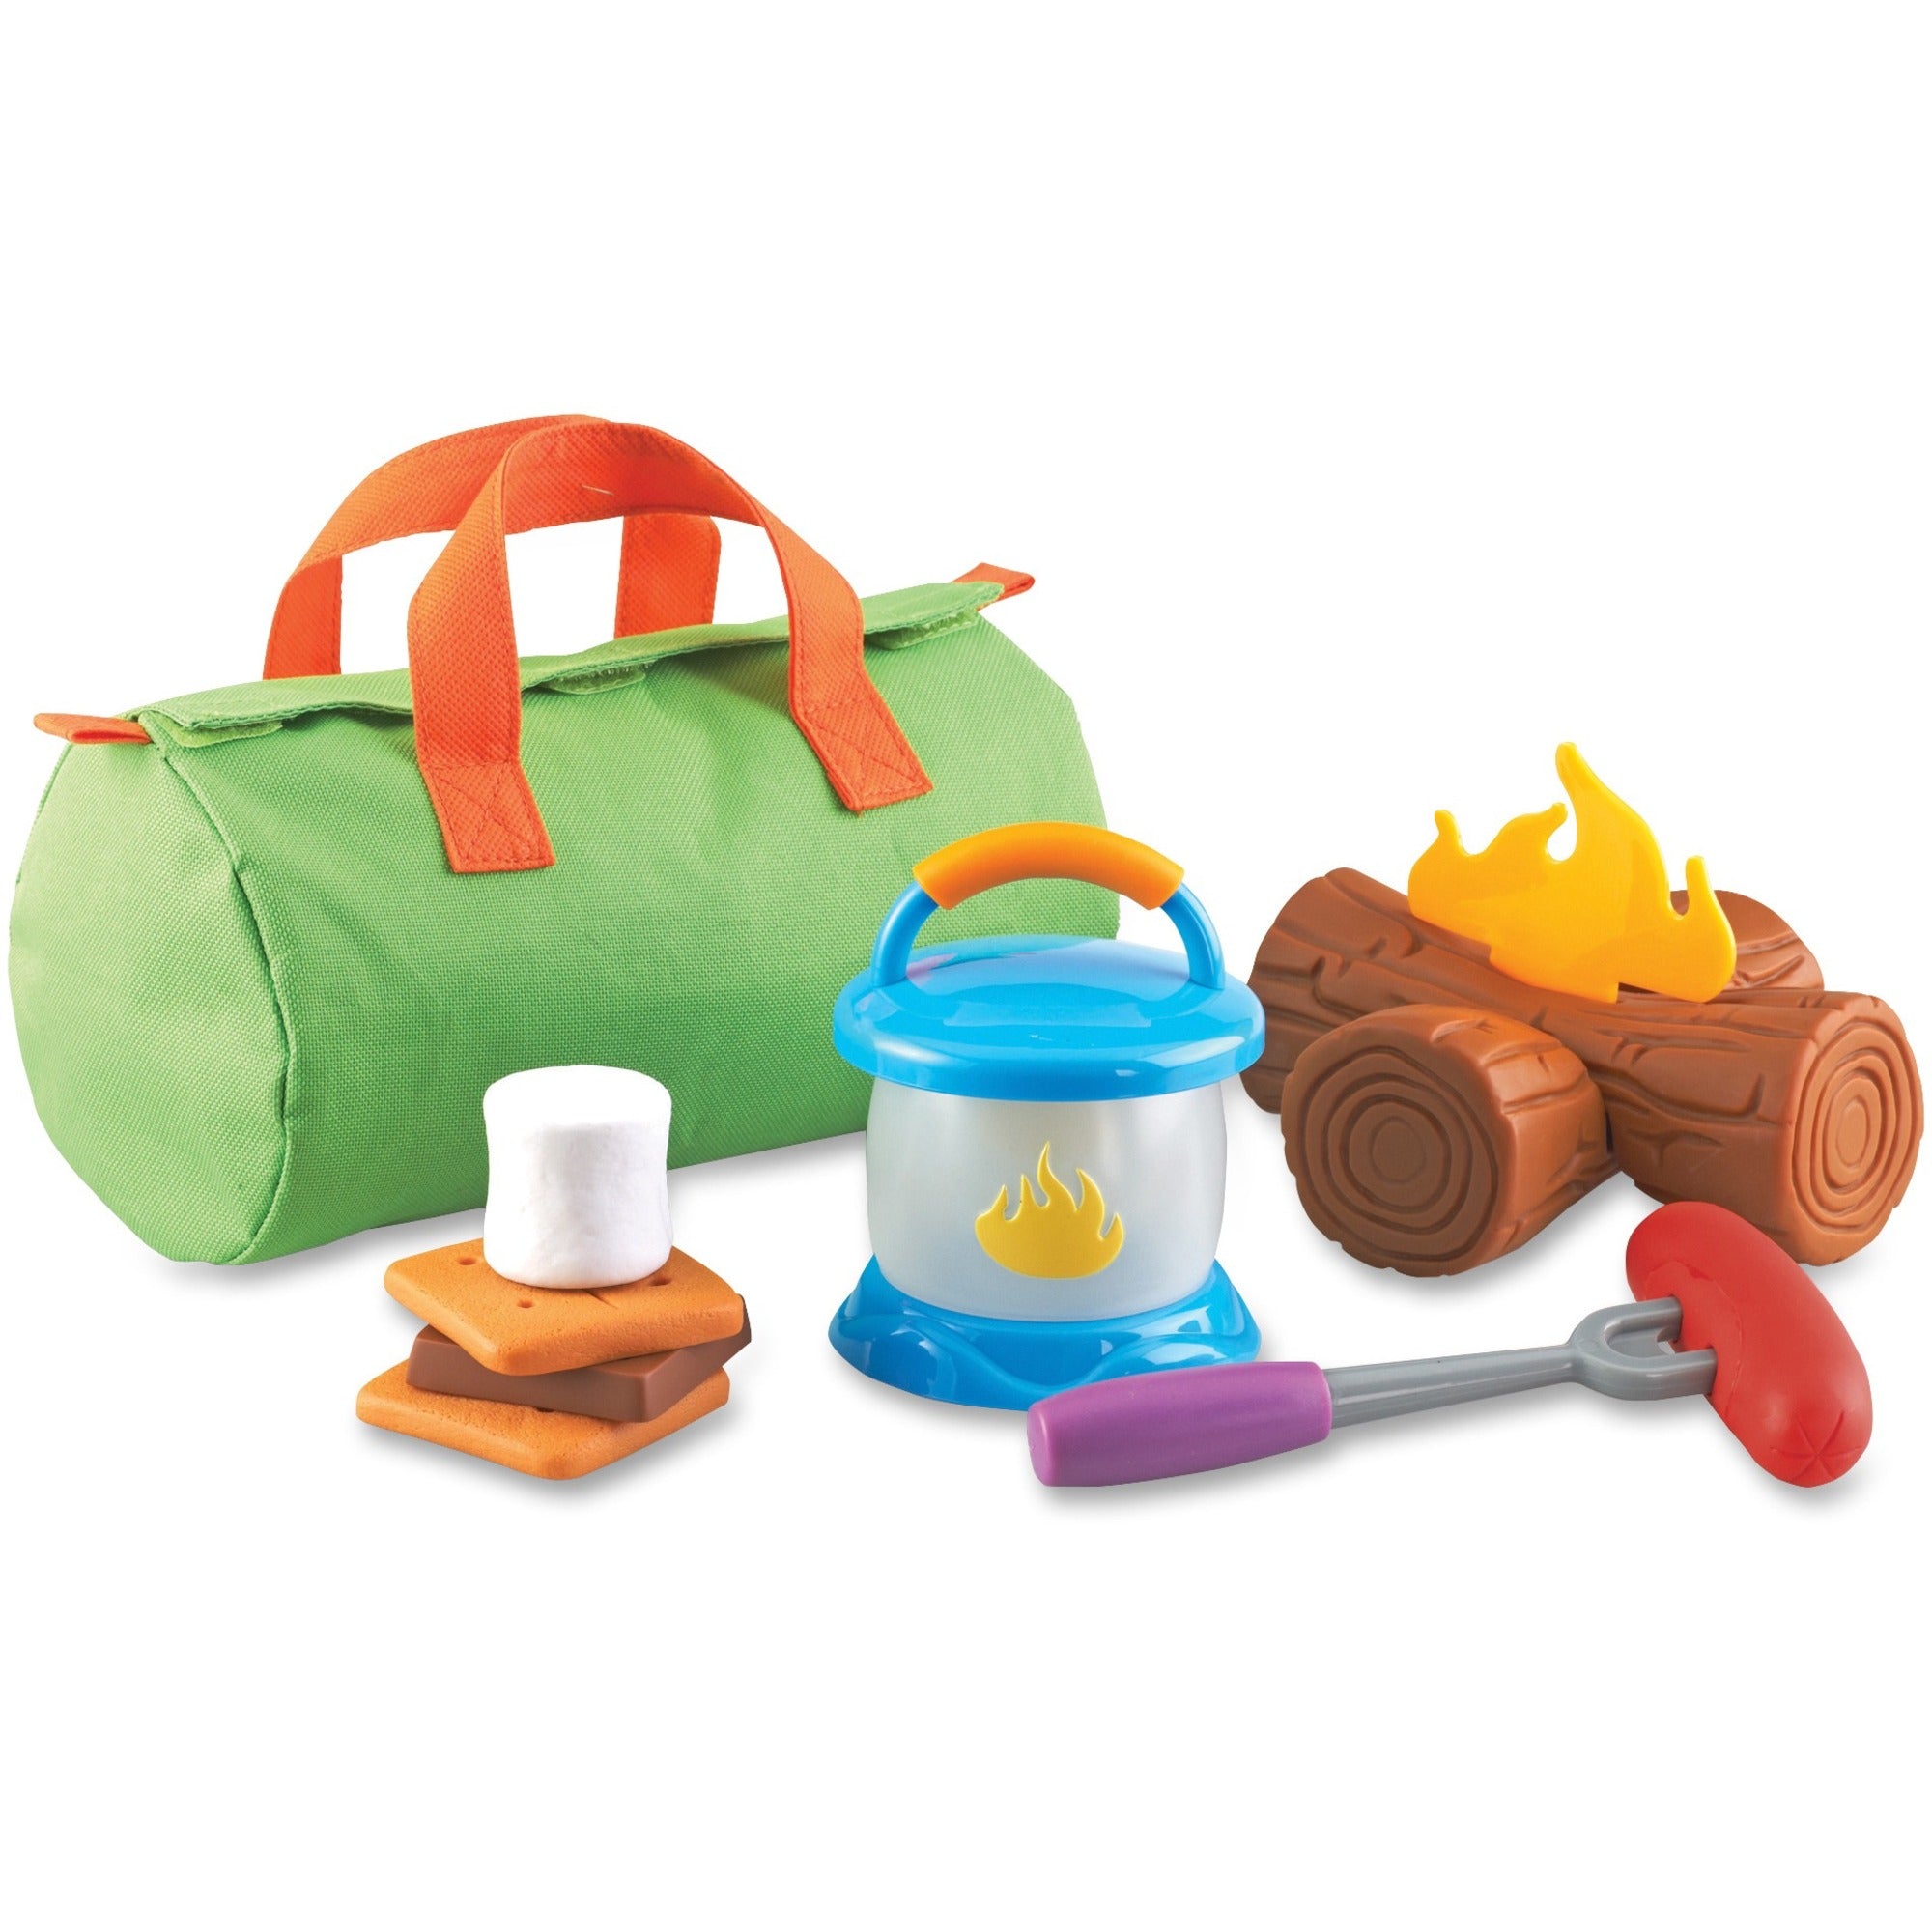 New Sprouts - Camp Out! Activity Set - 1 / Set - 2 Year - Assorted - 